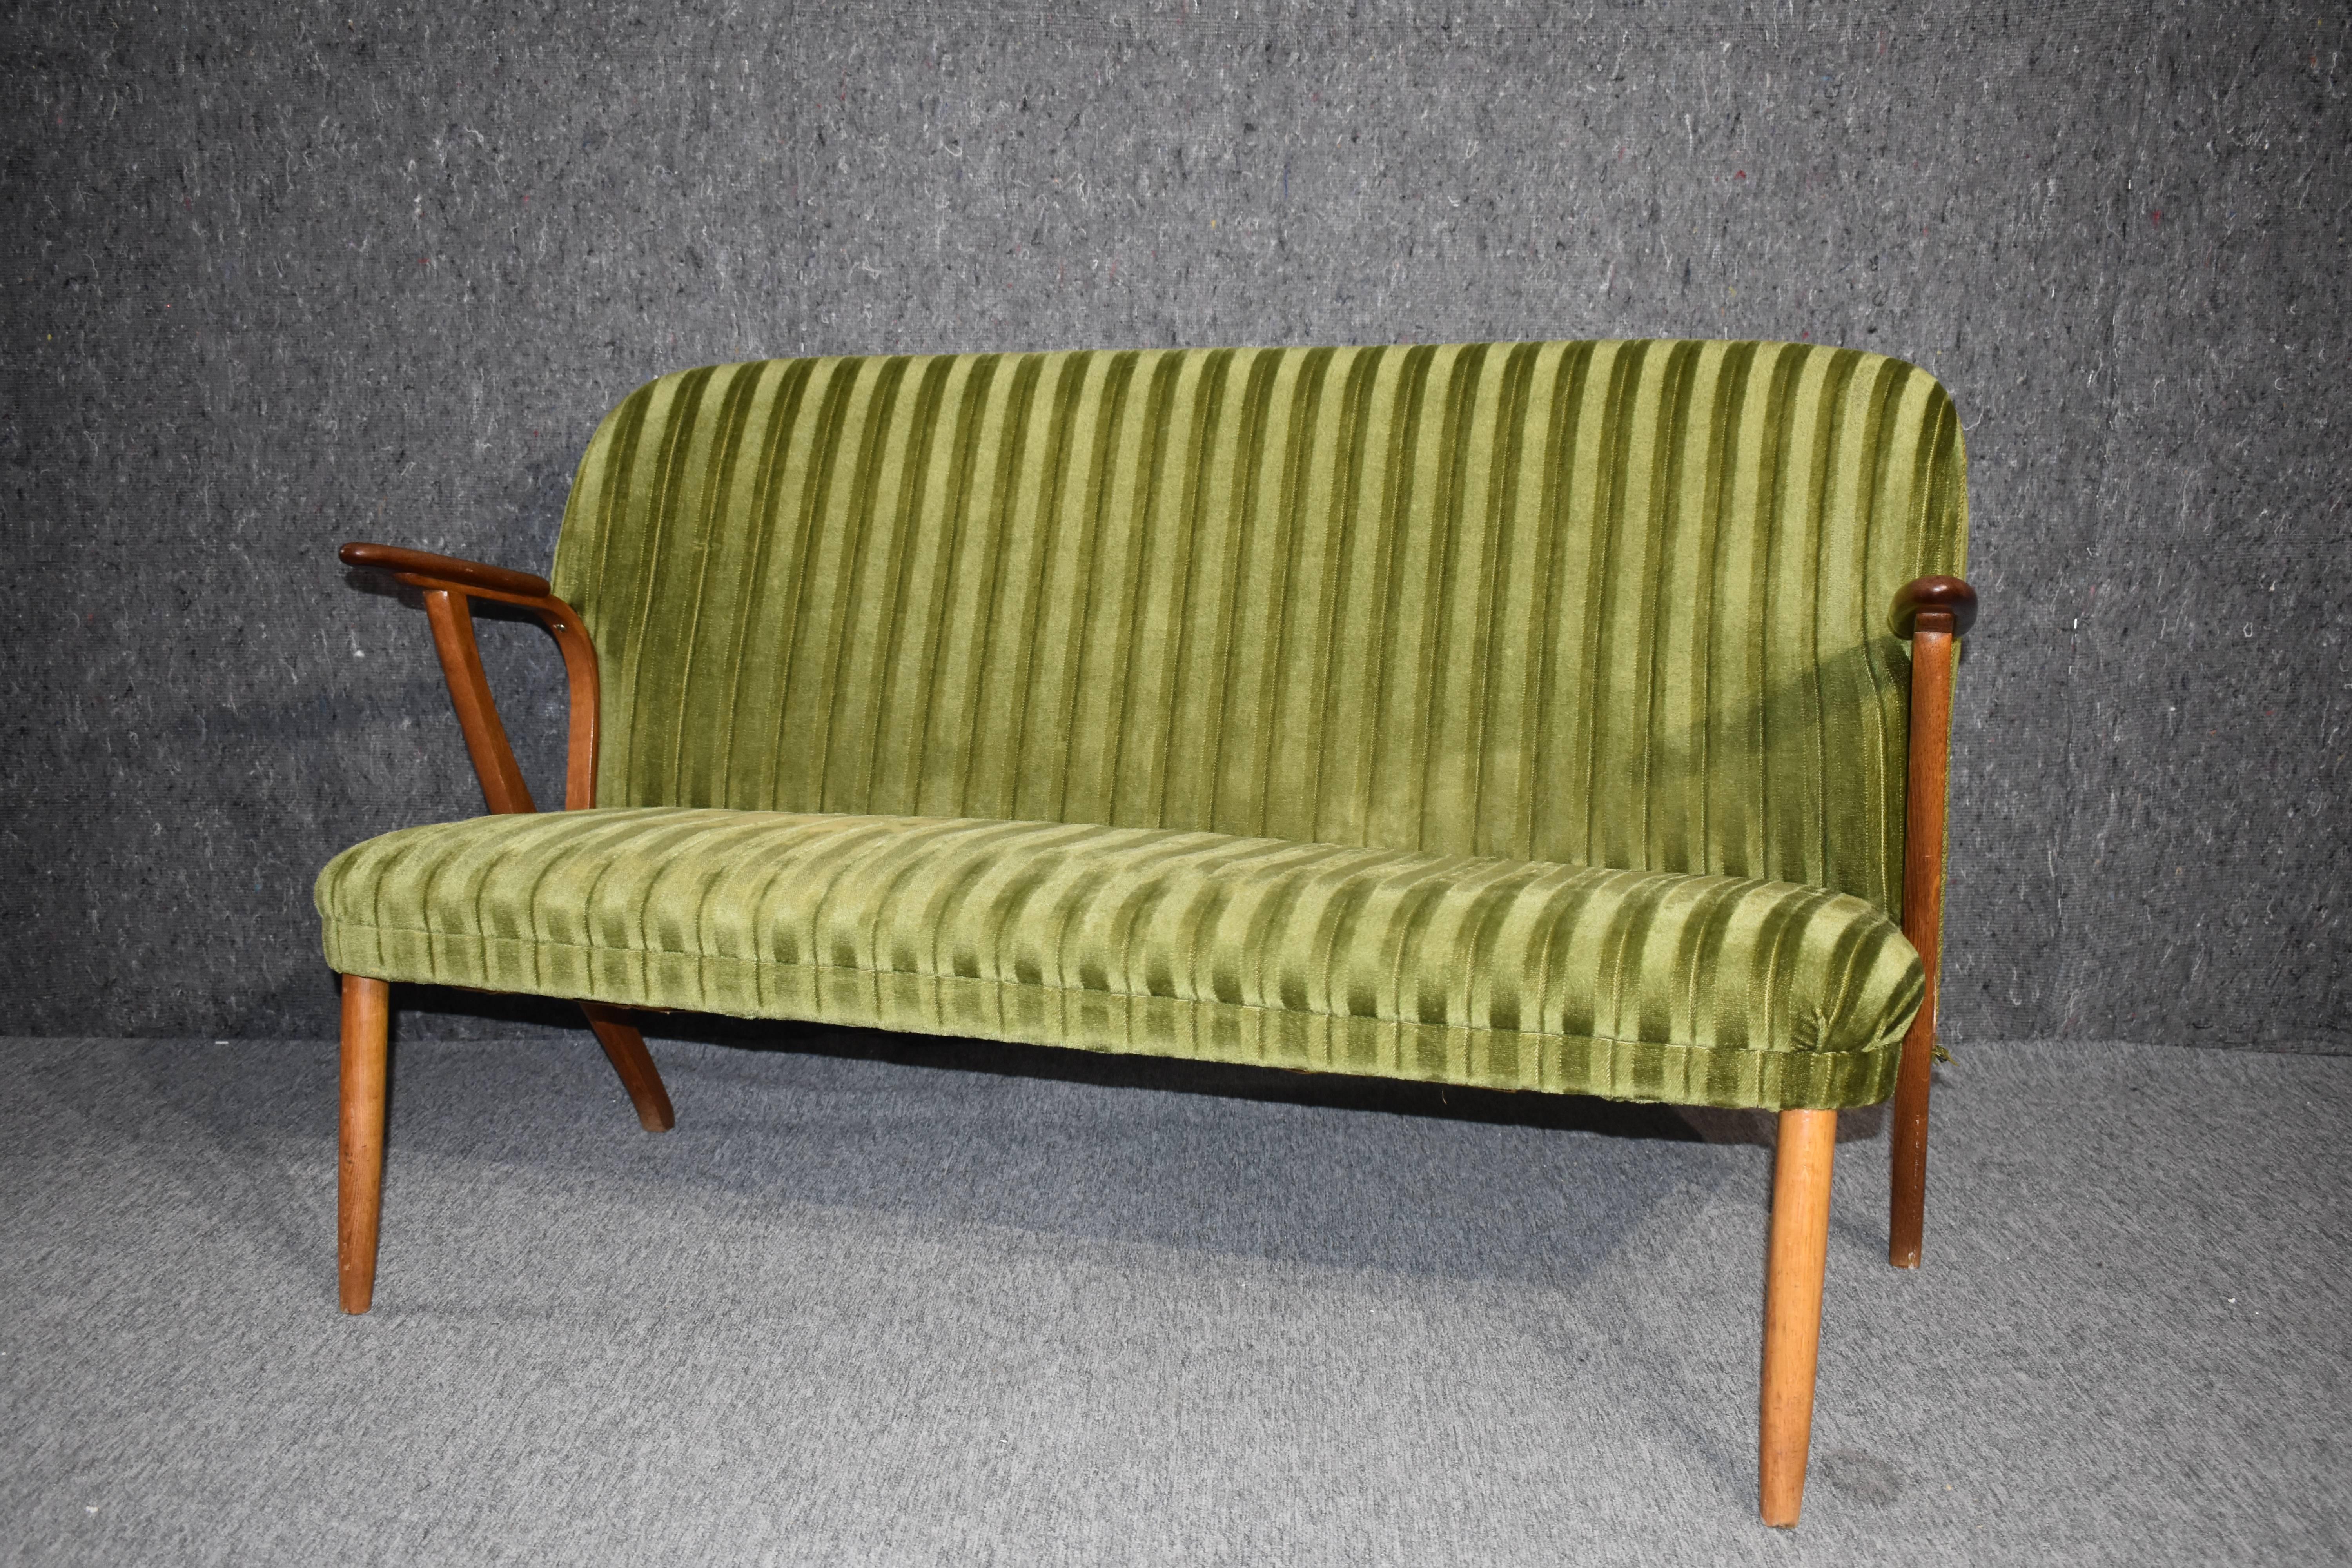 Two-Seat Danish Mid-Century Modern Green Teak Sofa In Good Condition For Sale In Odense, DK